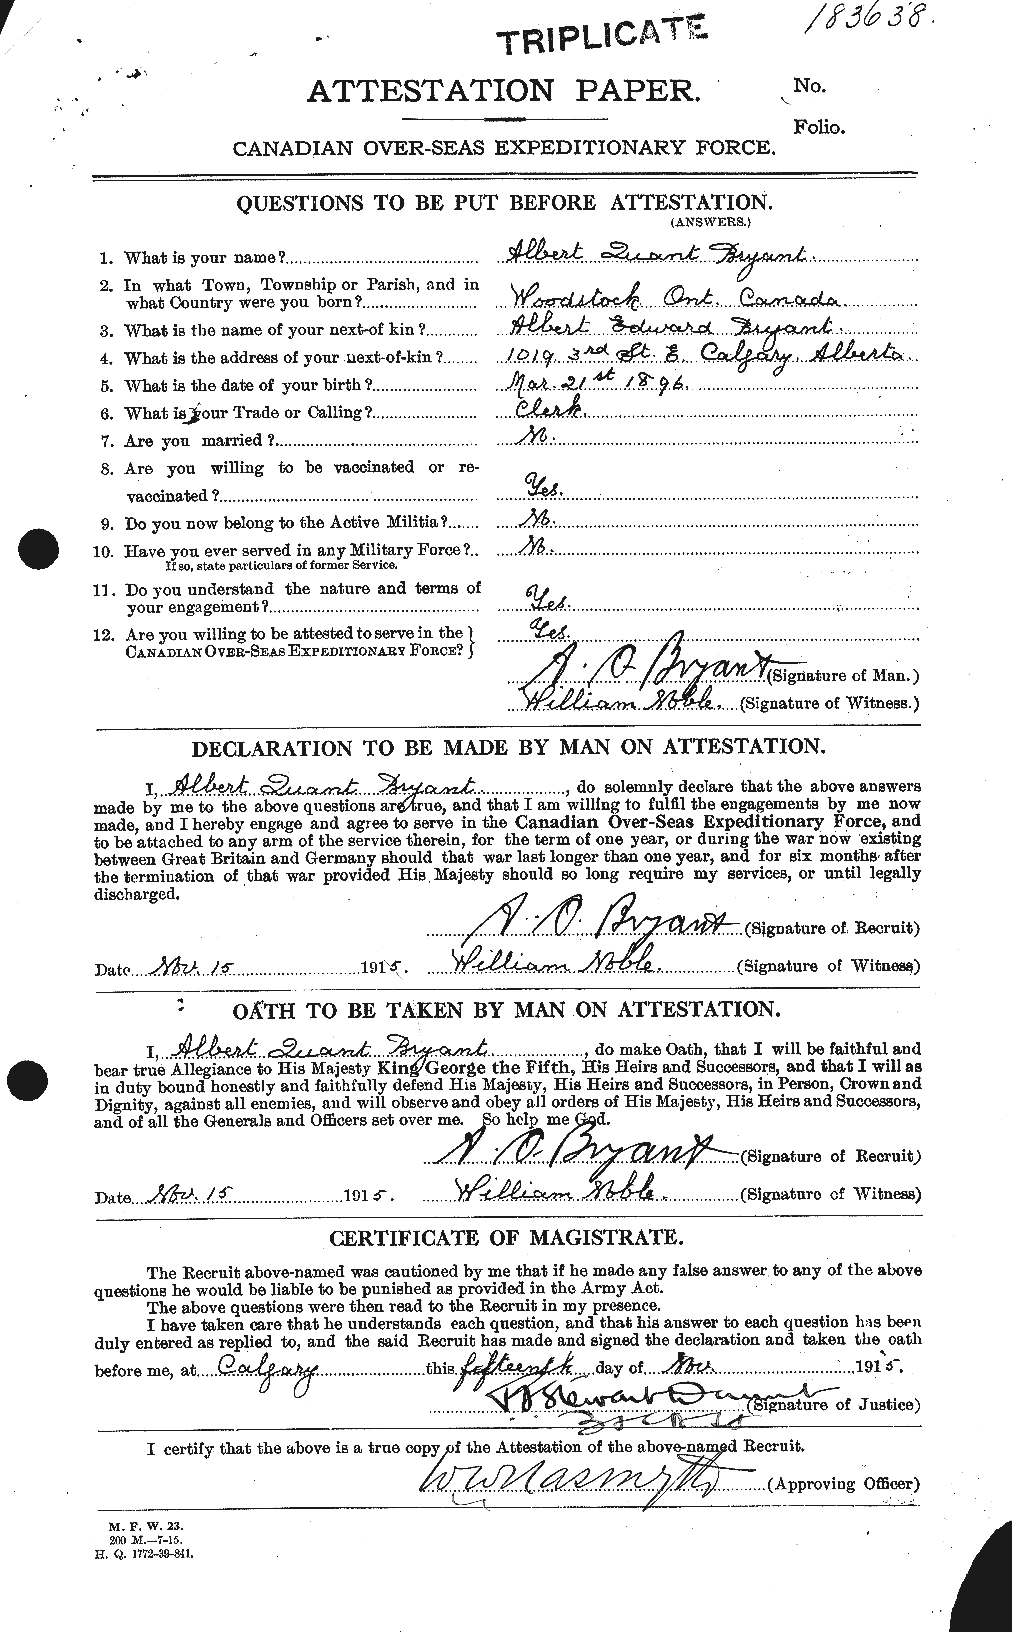 Personnel Records of the First World War - CEF 270781a